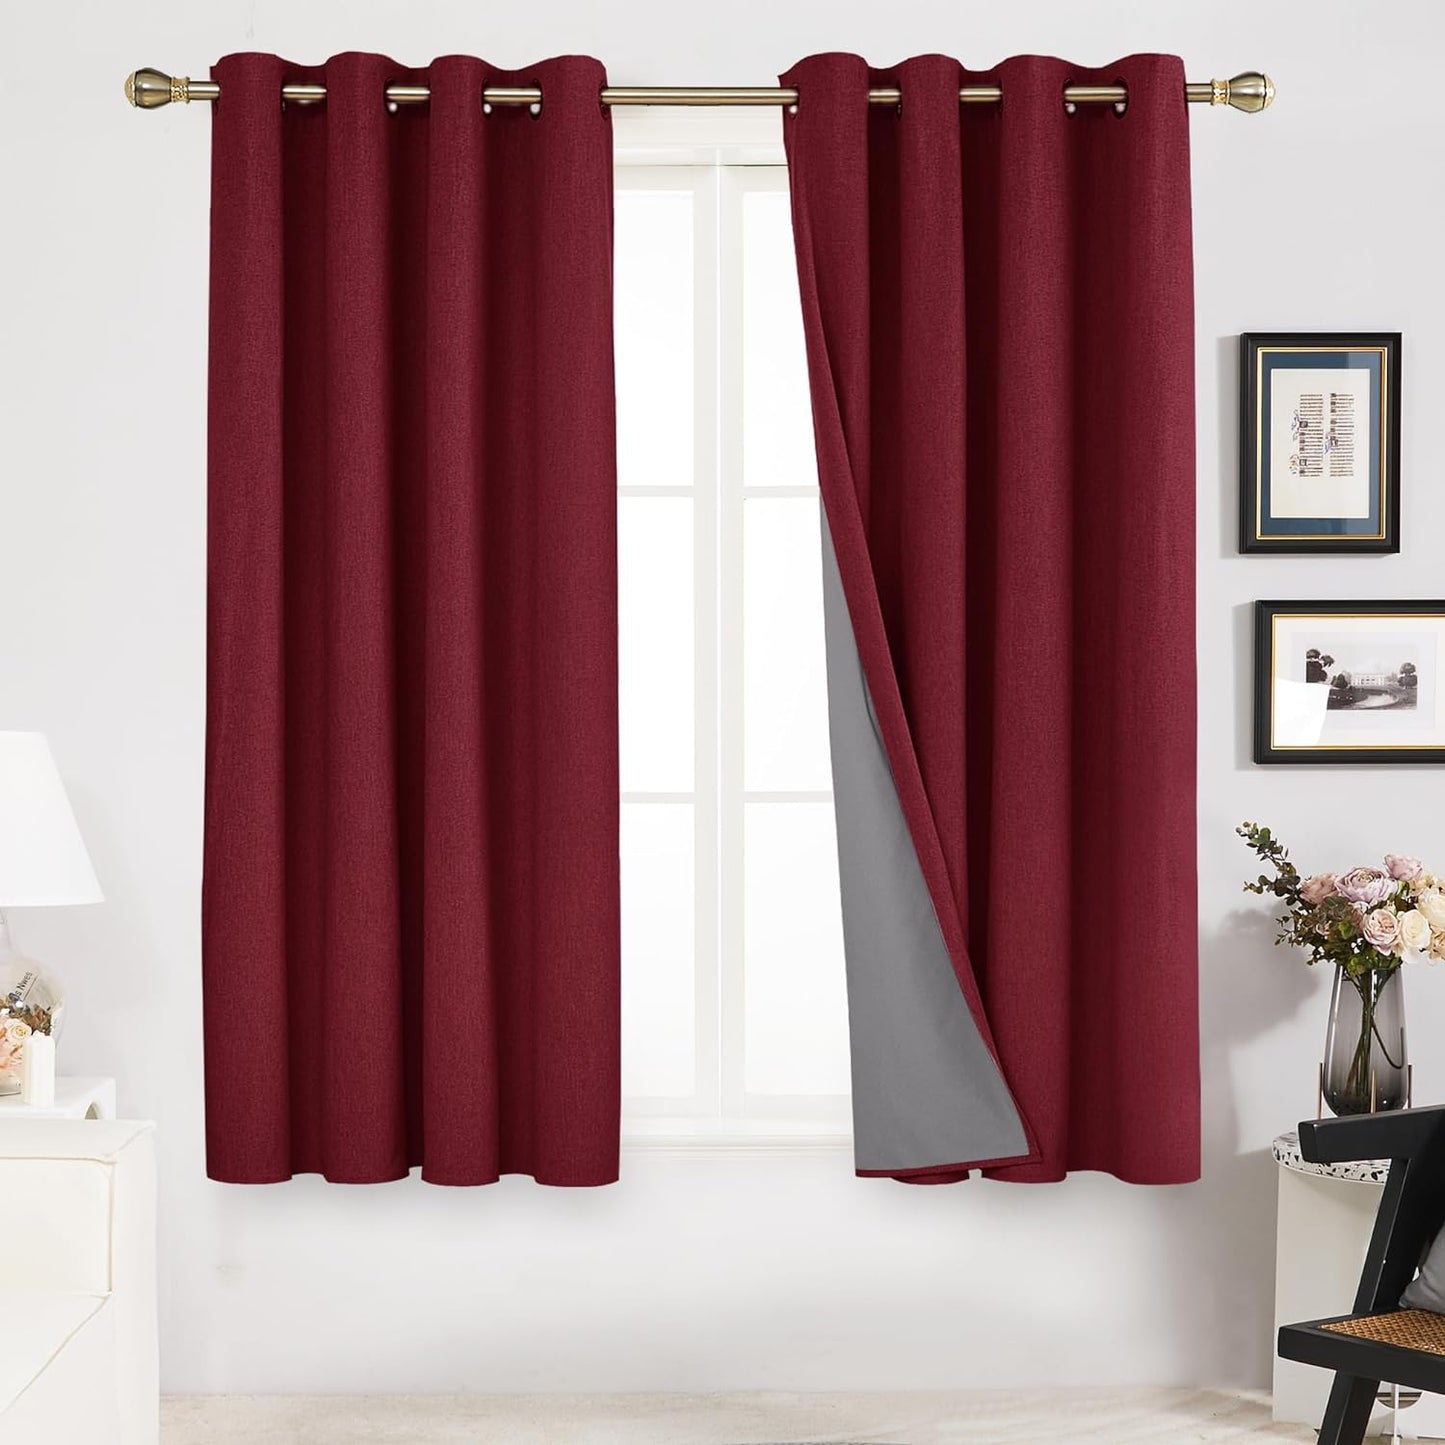 Deconovo Linen Blackout Curtains 84 Inch Length Set of 2, Thermal Curtain Drapes with Grey Coating, Total Light Blocking Waterproof Curtains for Indoor/Outdoor (Light Grey, 52W X 84L Inch)  Deconovo Wine Red 52X45 Inches 